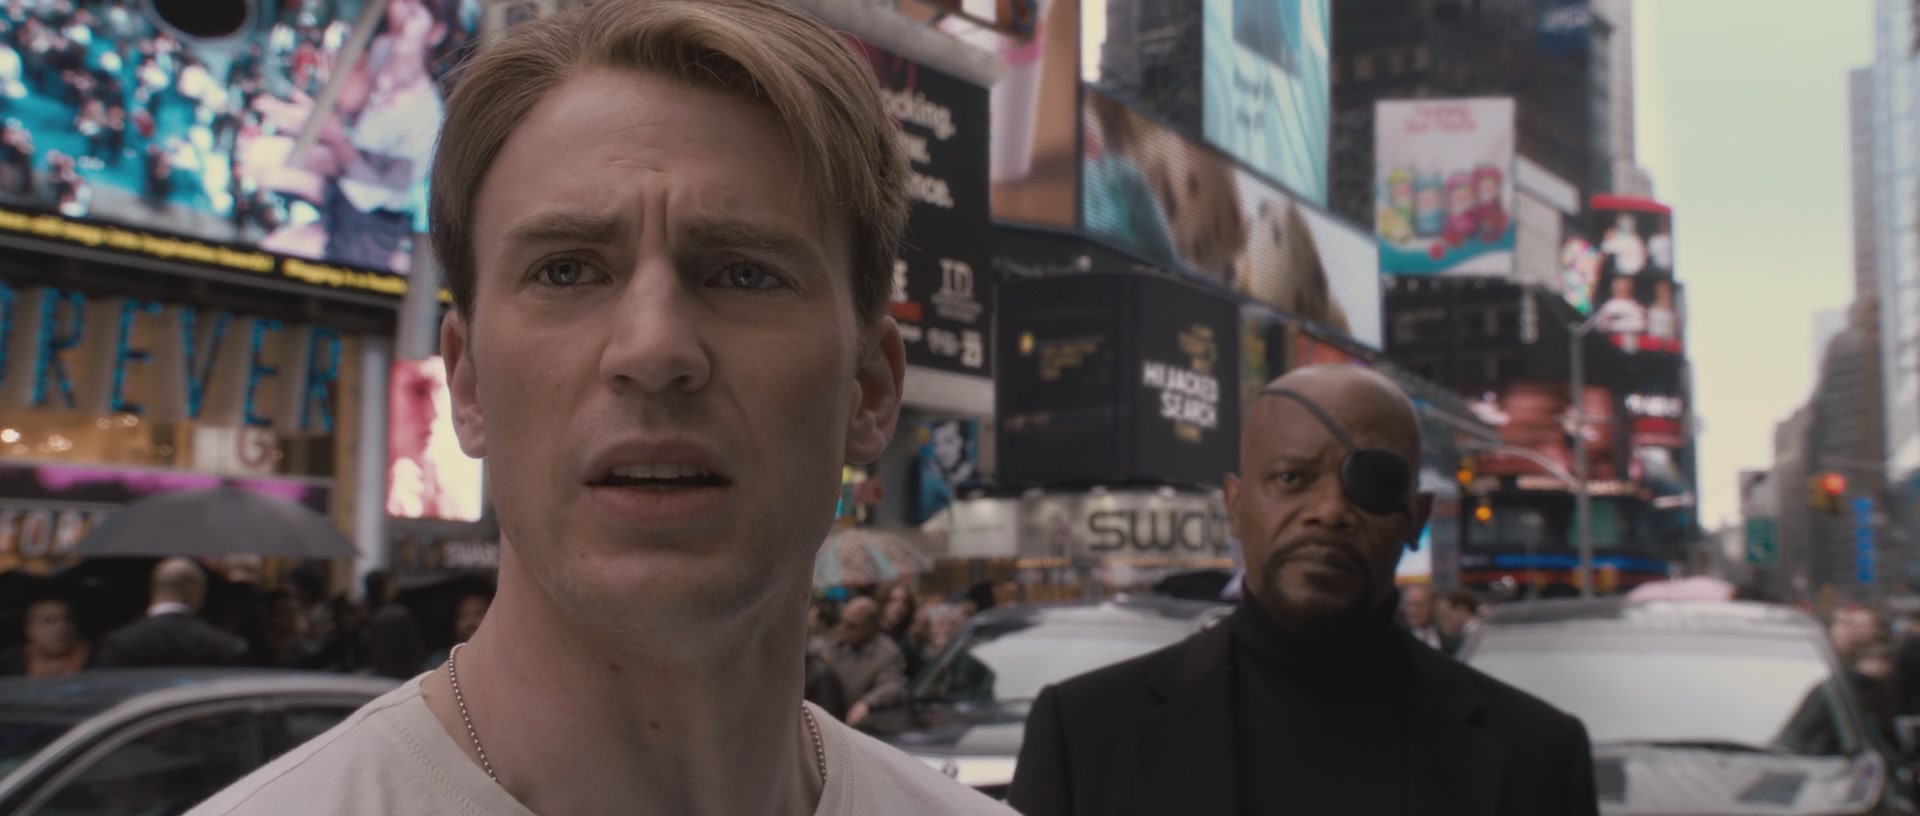 Steve Rogers (Chris Evans) tells Nick Fury (Samuel L. Jackson) that he had a date in Captain America: The First Avengers (2011), Marvel Entertainment